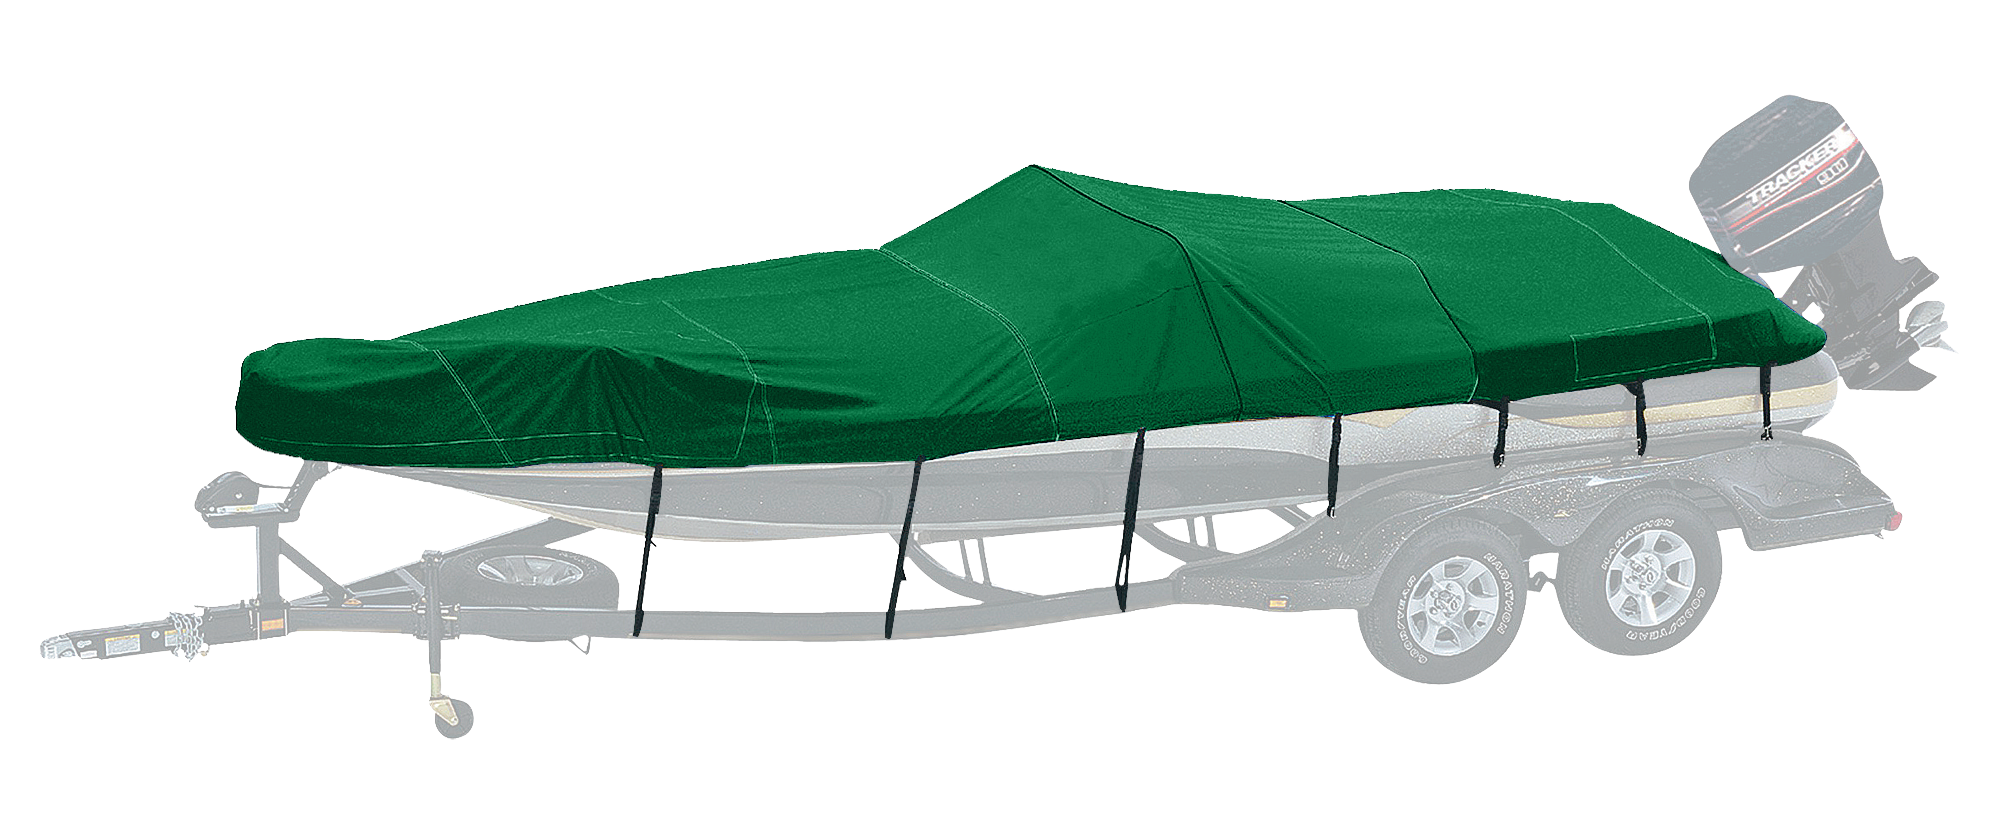 Bass Pro Shops Westland Exact Fit Boat Cover - Tahoe Boats - 2004-2005 Q4 Fish & Ski I/O - Forest Green